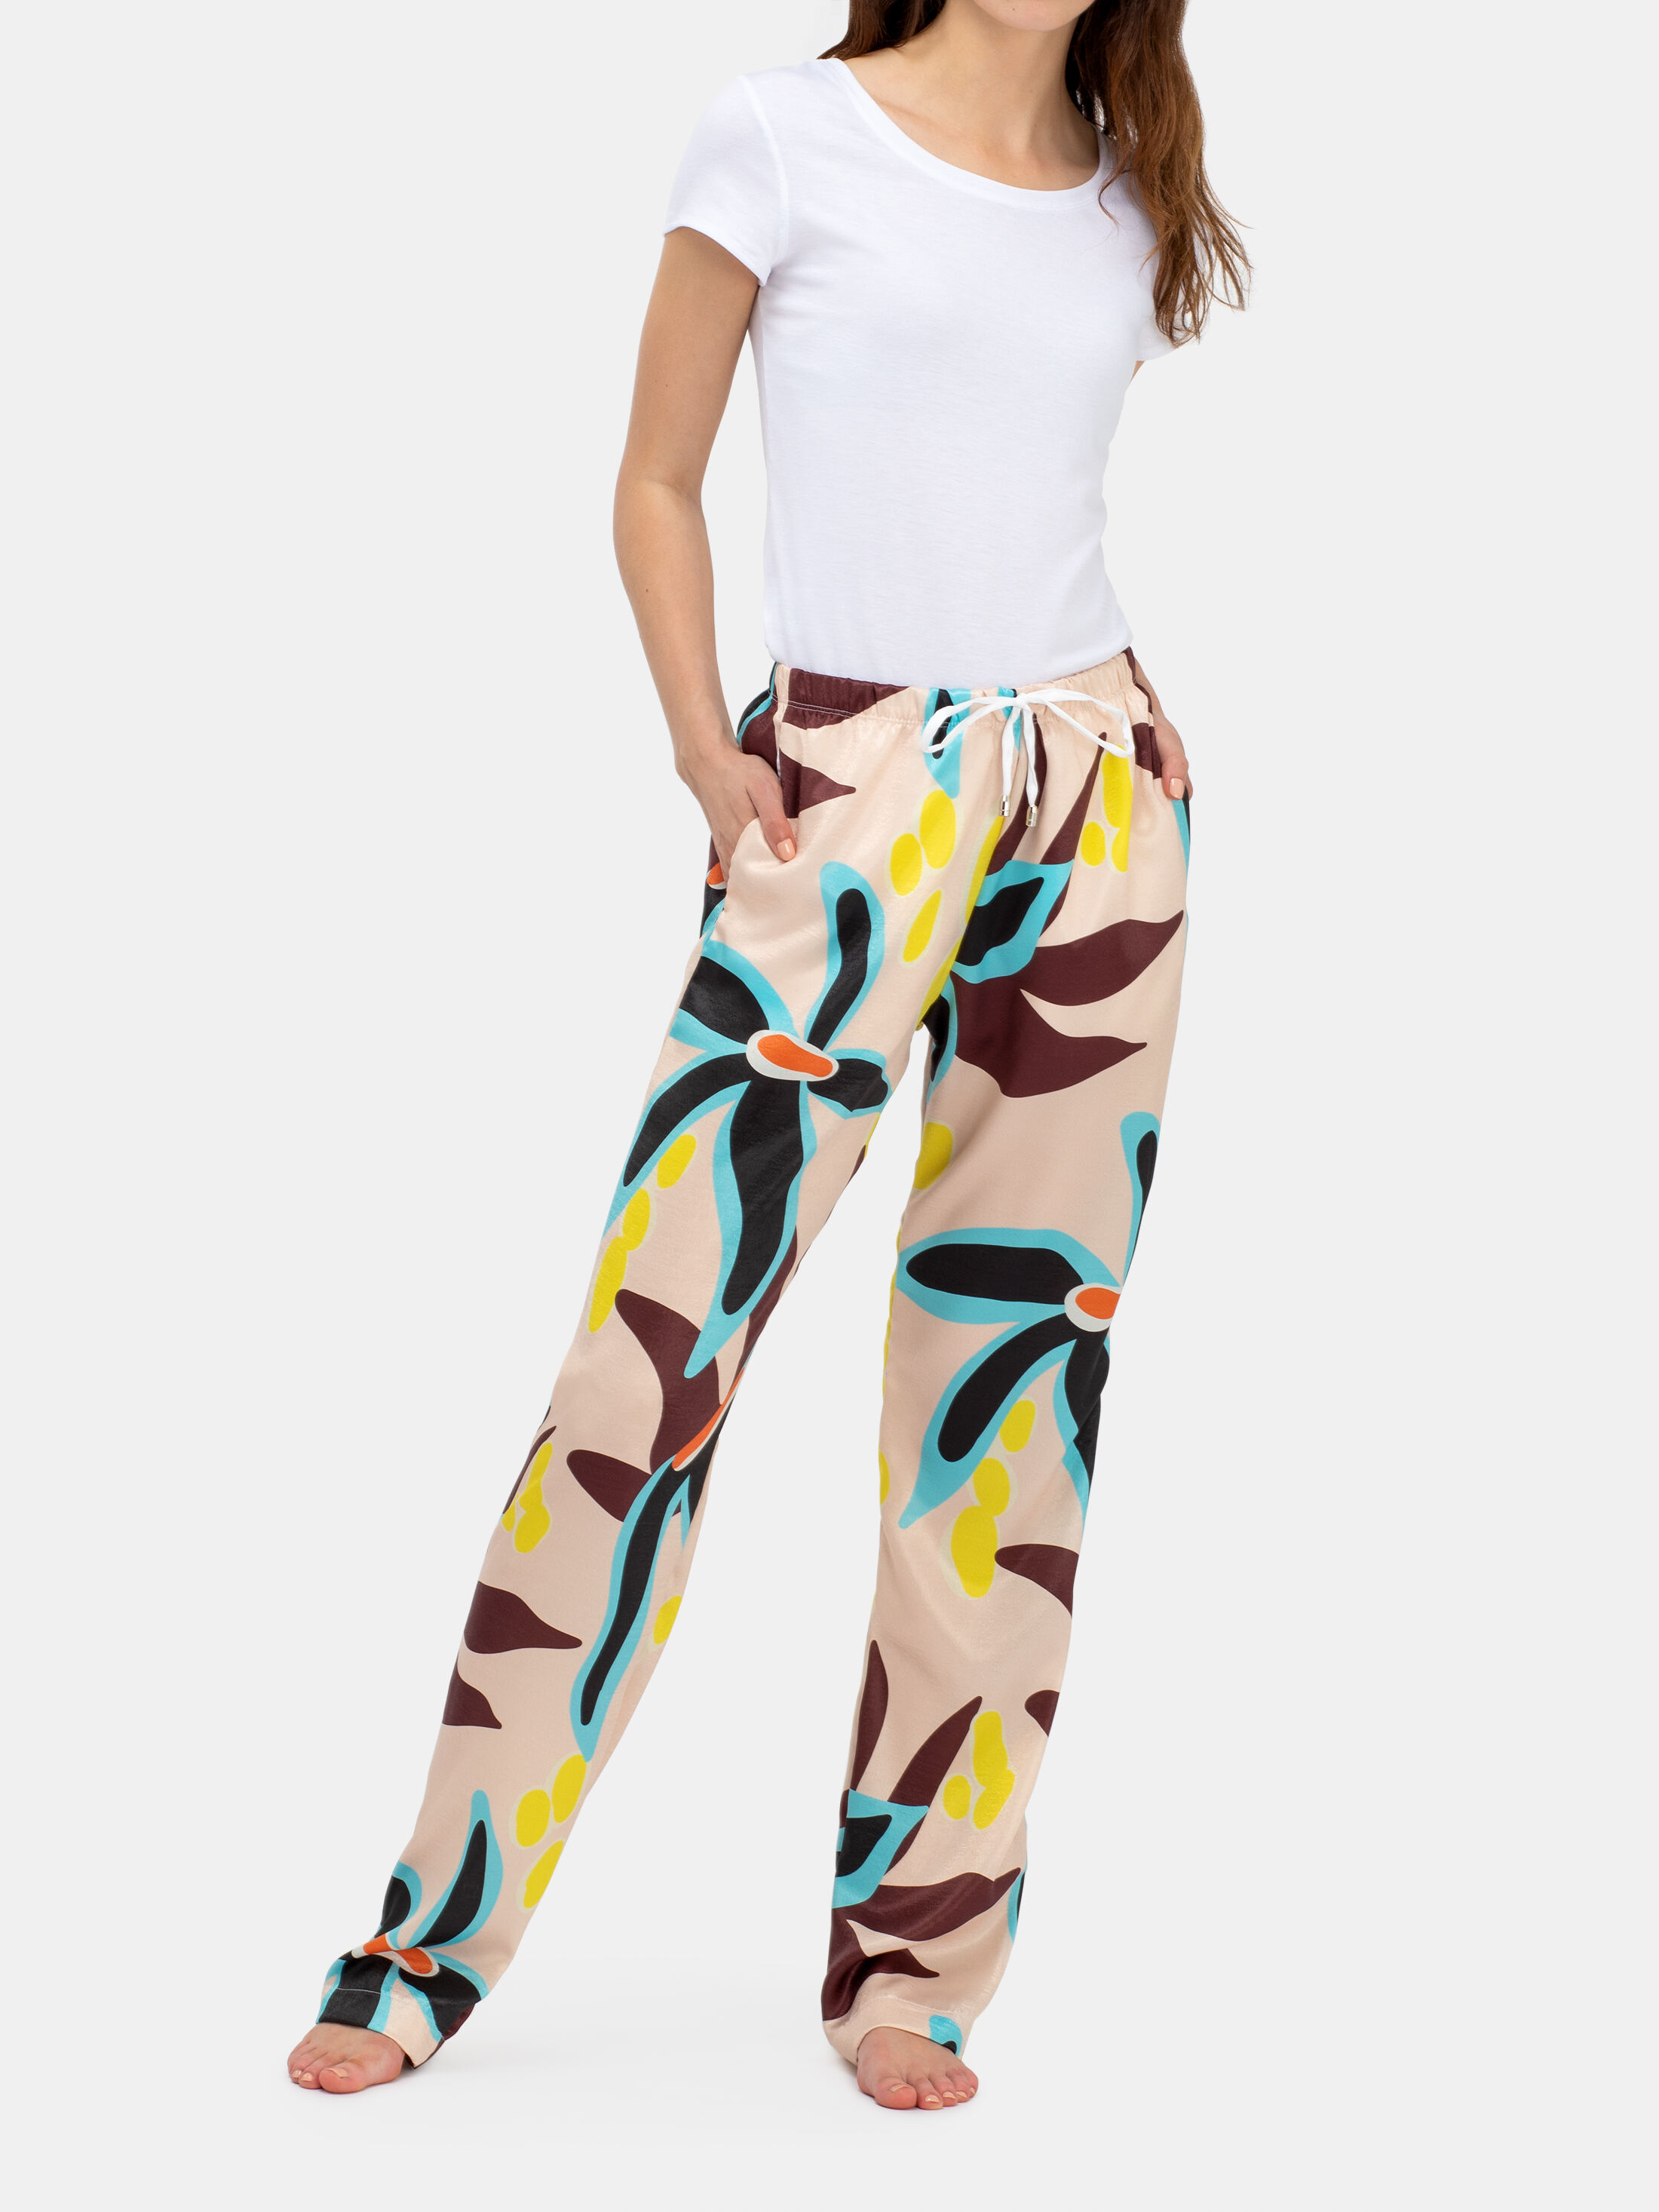 Printed Trousers | Printed collared shirts, Yellow shirts, Printed trousers